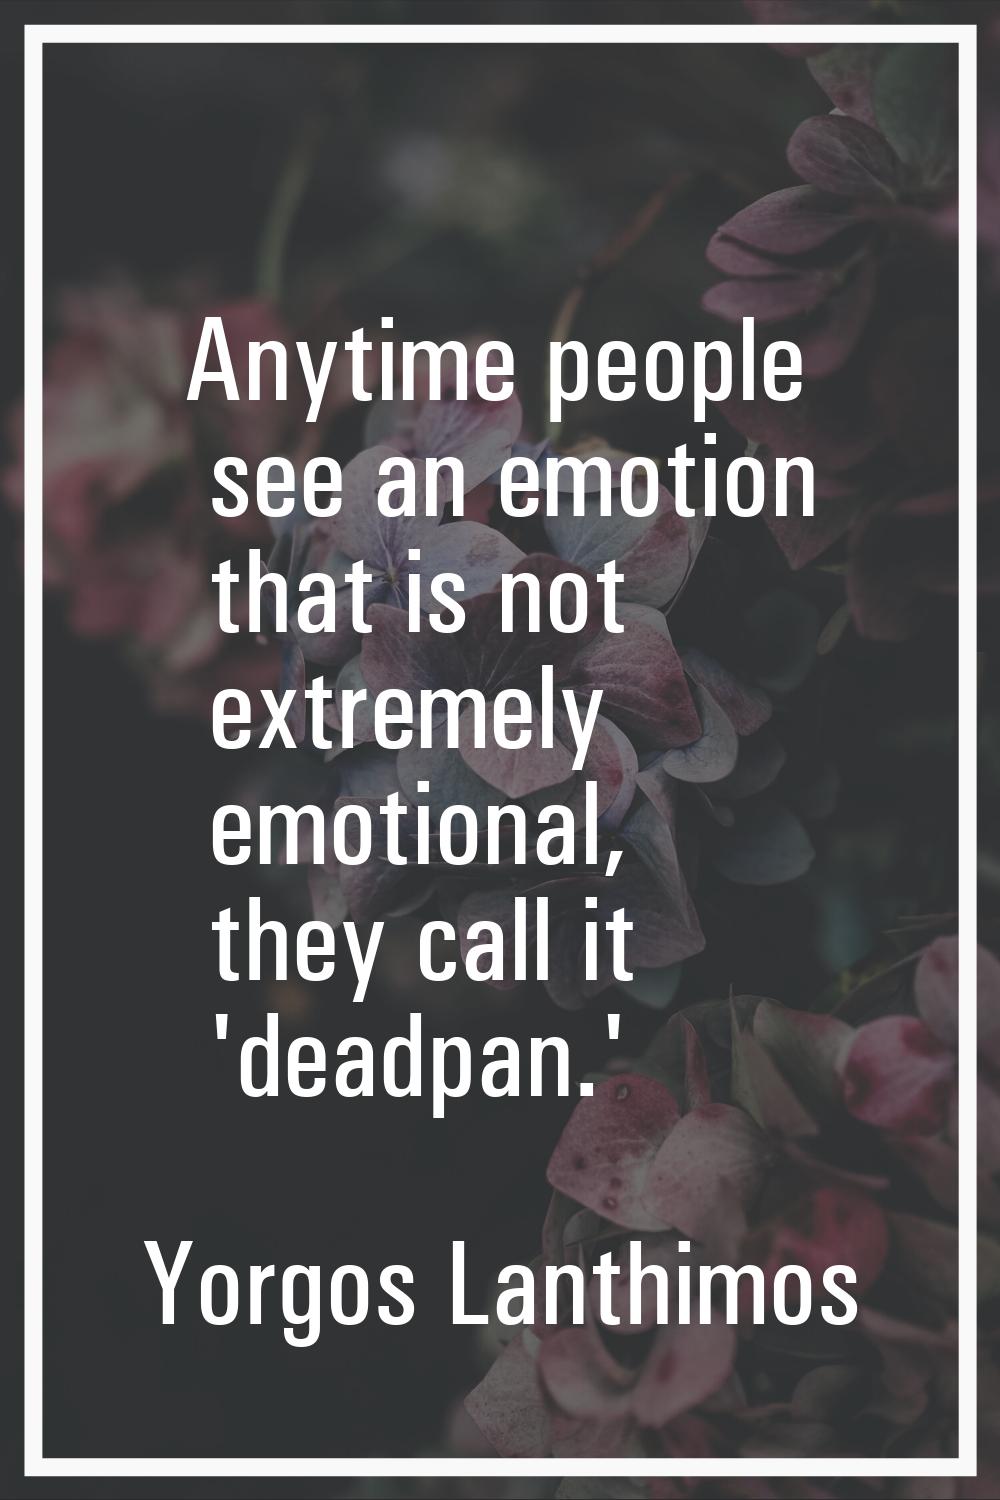 Anytime people see an emotion that is not extremely emotional, they call it 'deadpan.'